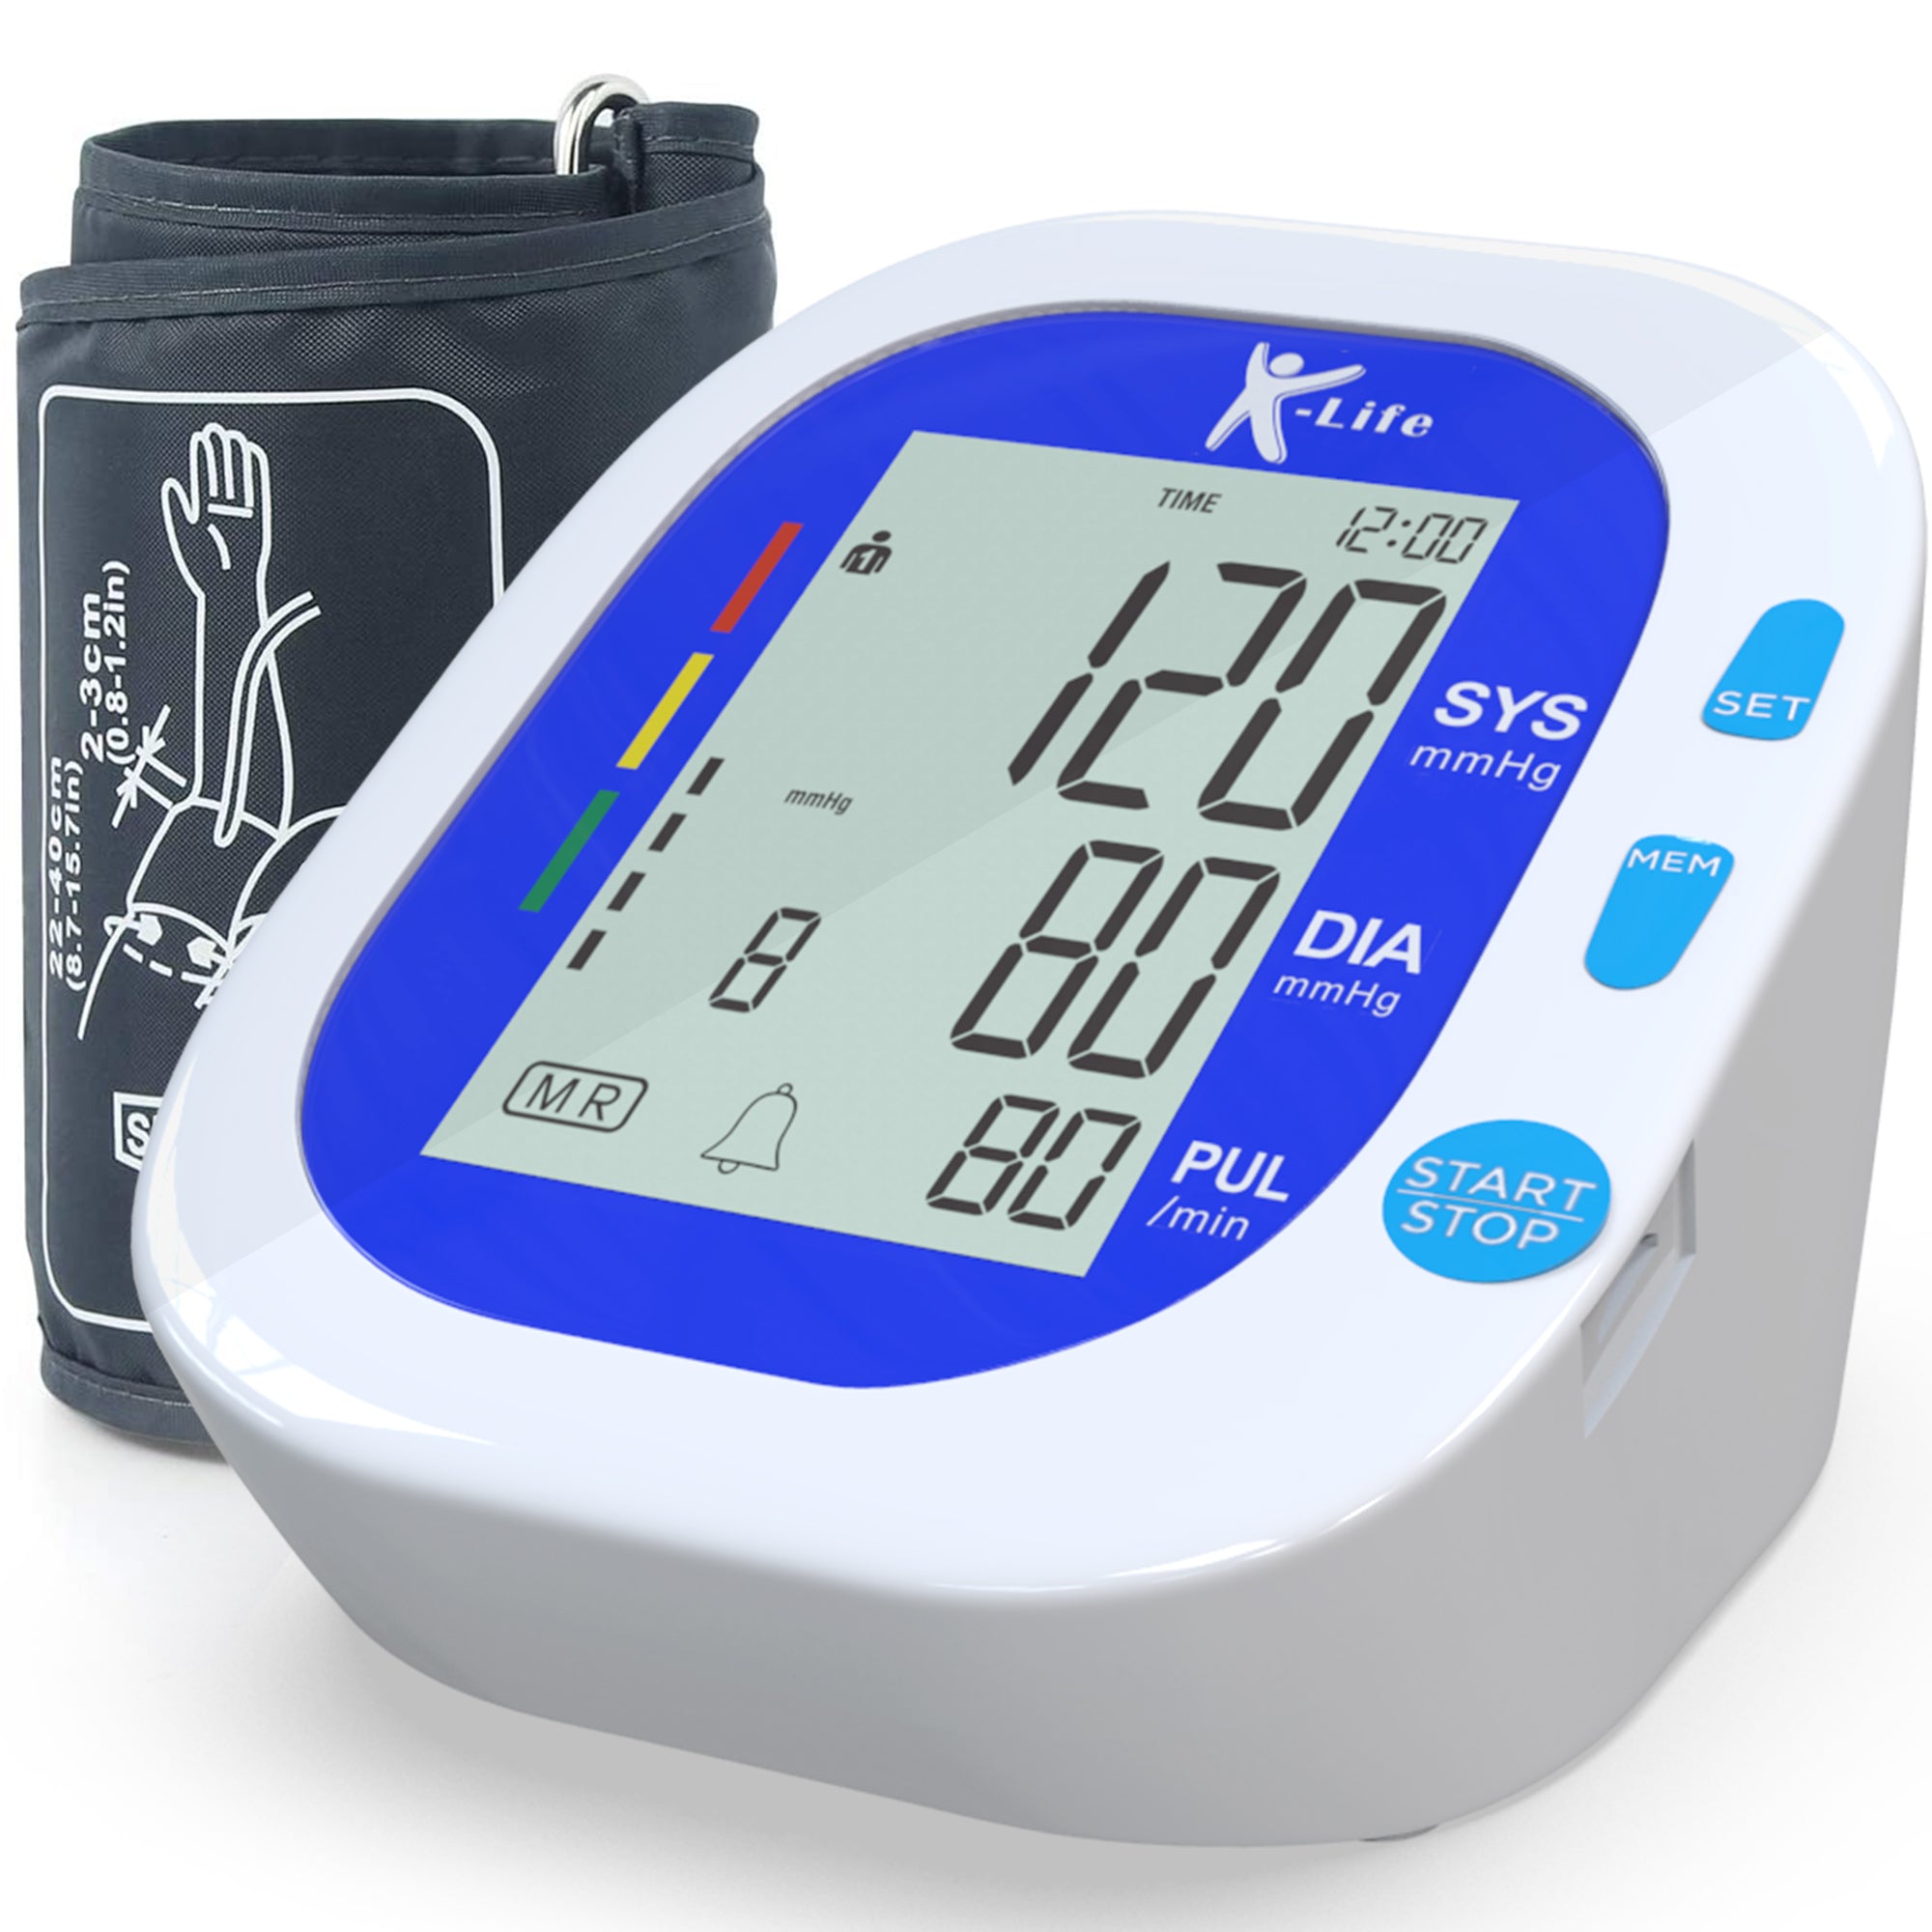 K-Life Model BPM-104 Fully Automatic Digital Electronic Blood Pressure Checking Monitor (white)